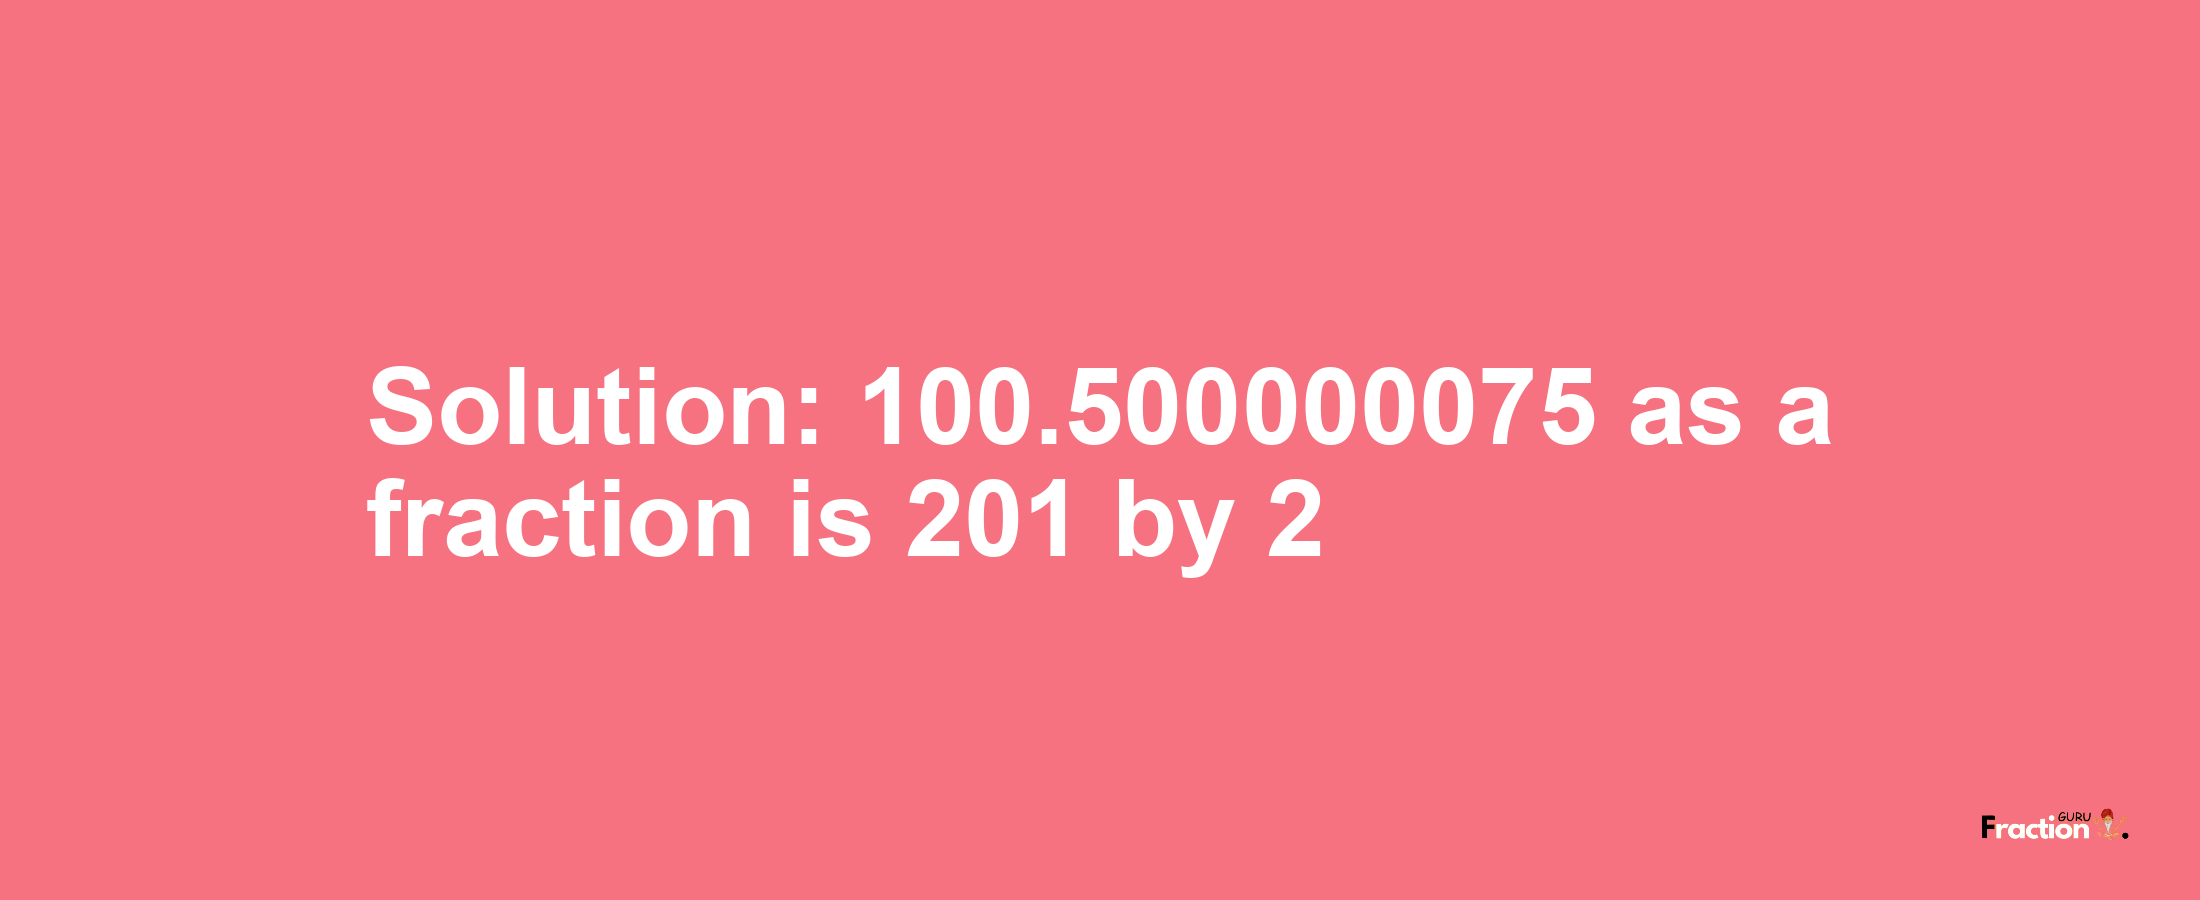 Solution:100.500000075 as a fraction is 201/2